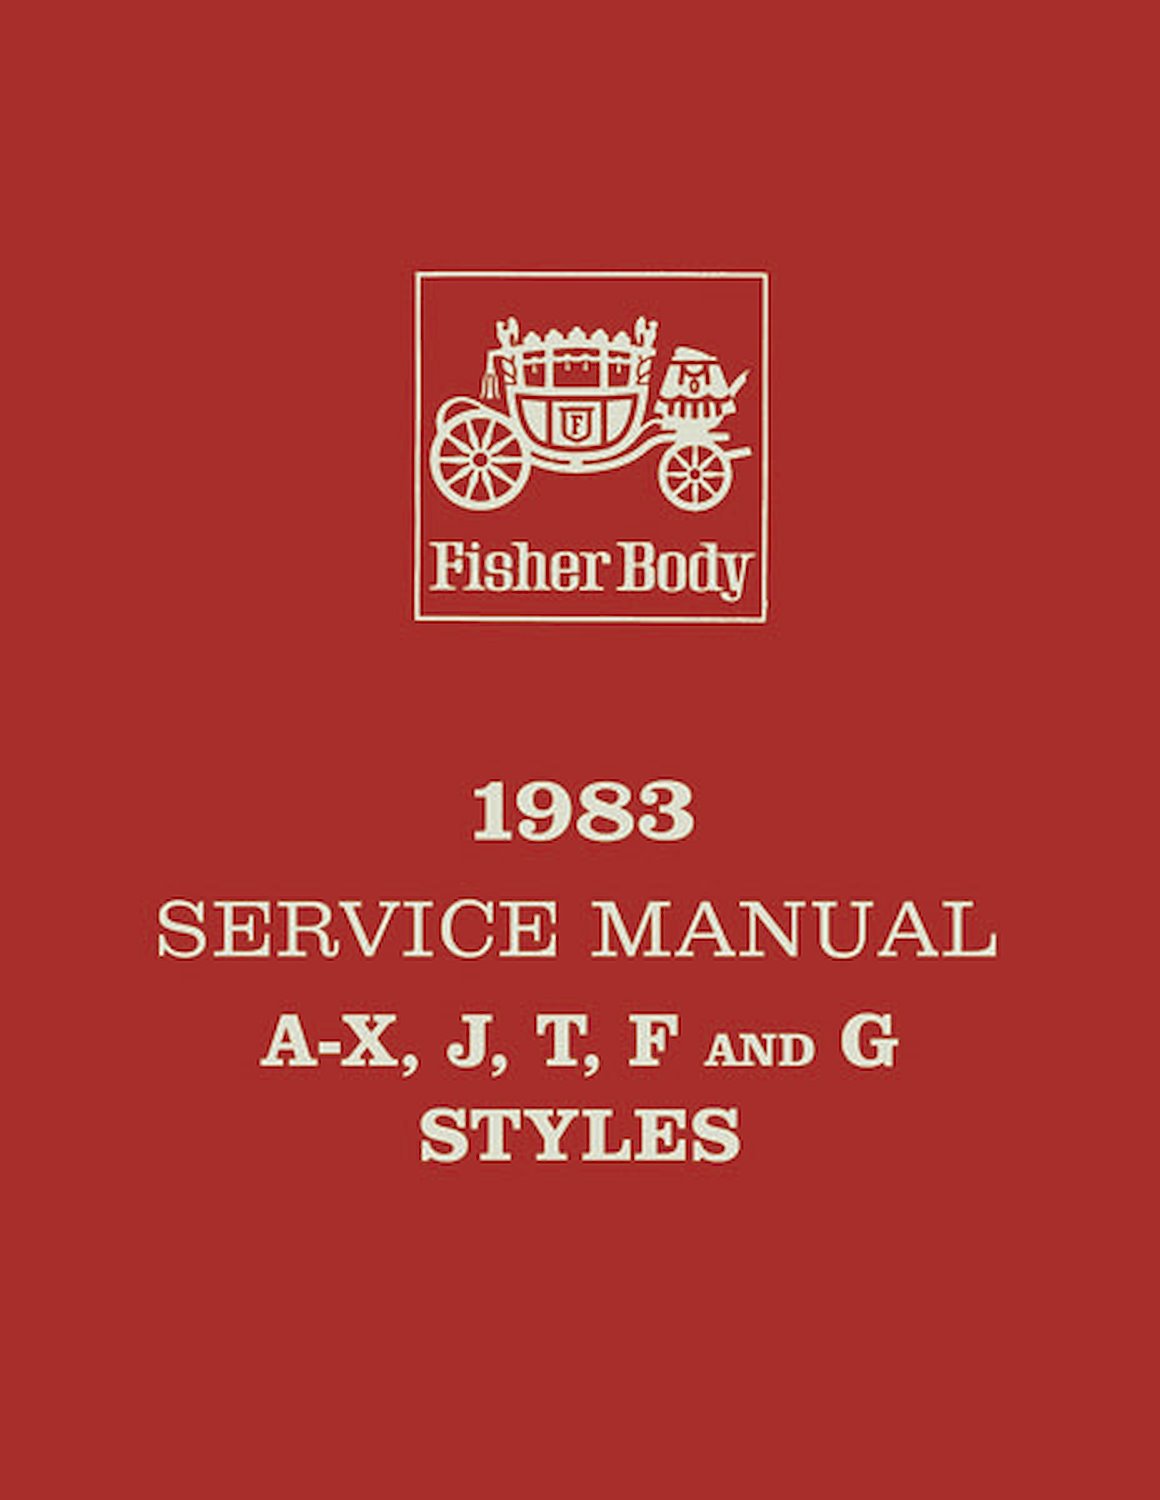 Fisher Body Service Manual for 1983 Buick, Cadillac, Chevrolet, Oldsmobile and Pontiac Models, A-F-G-J-T-X Body Styles